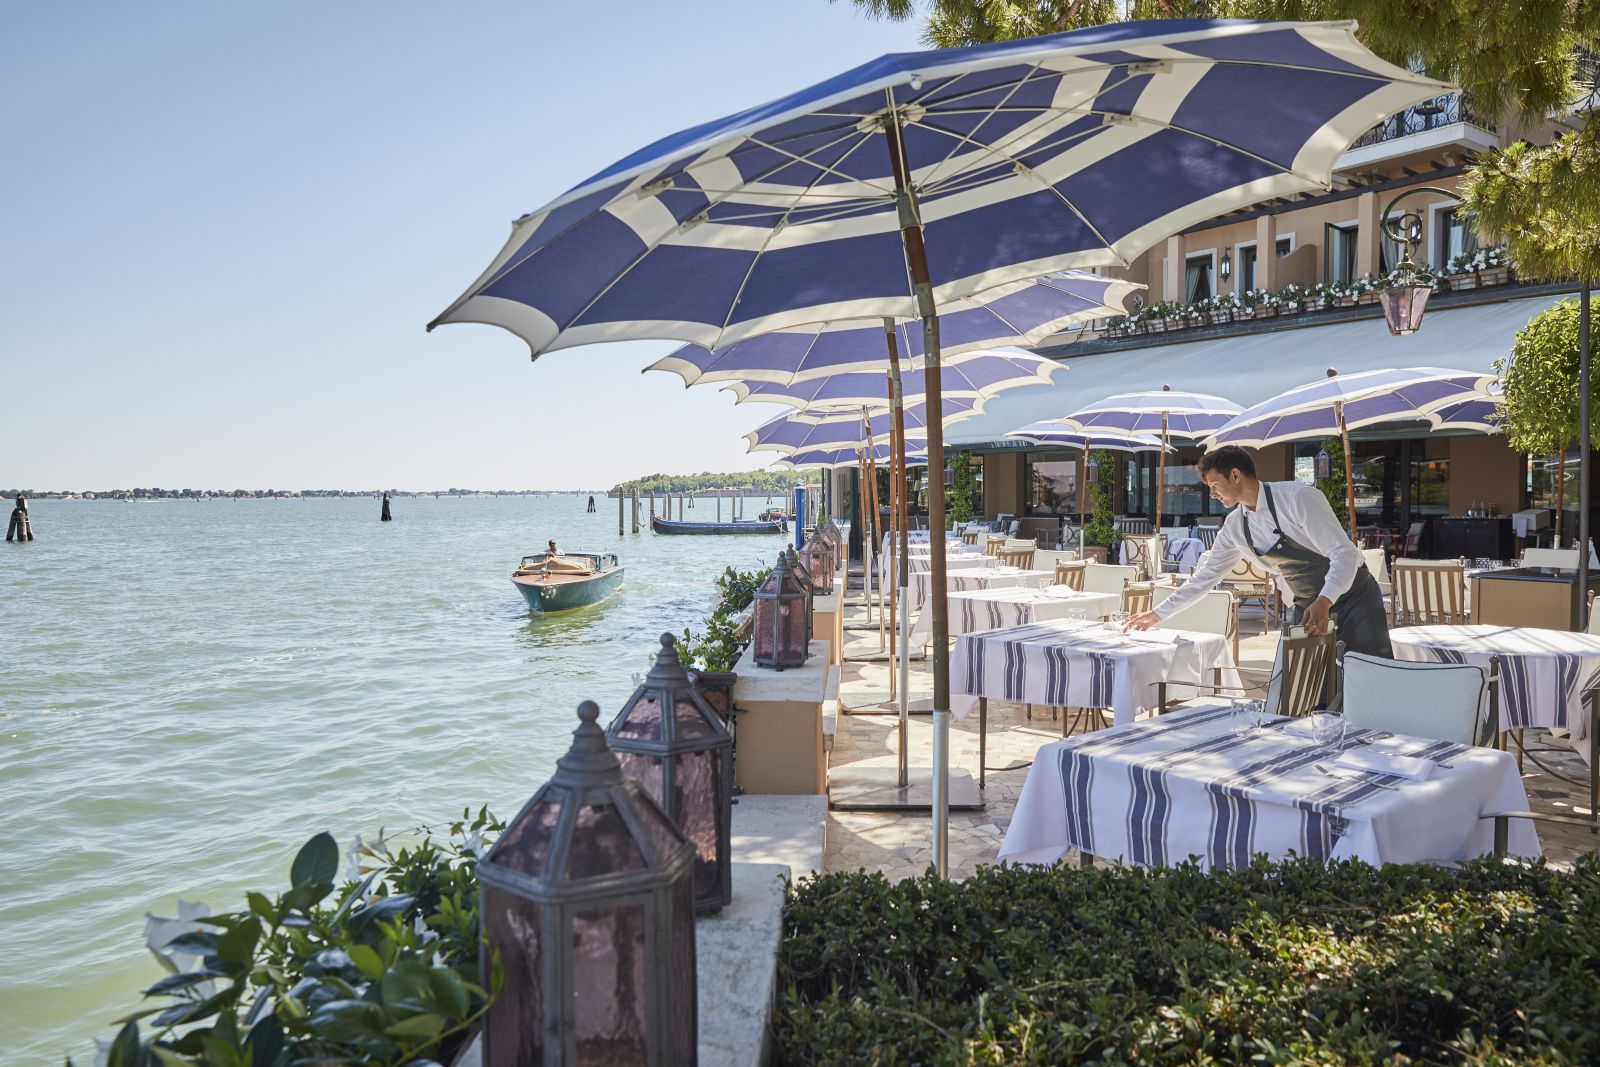 Outdoor dining with river views at Belmond Hotel Cipriani in Venice